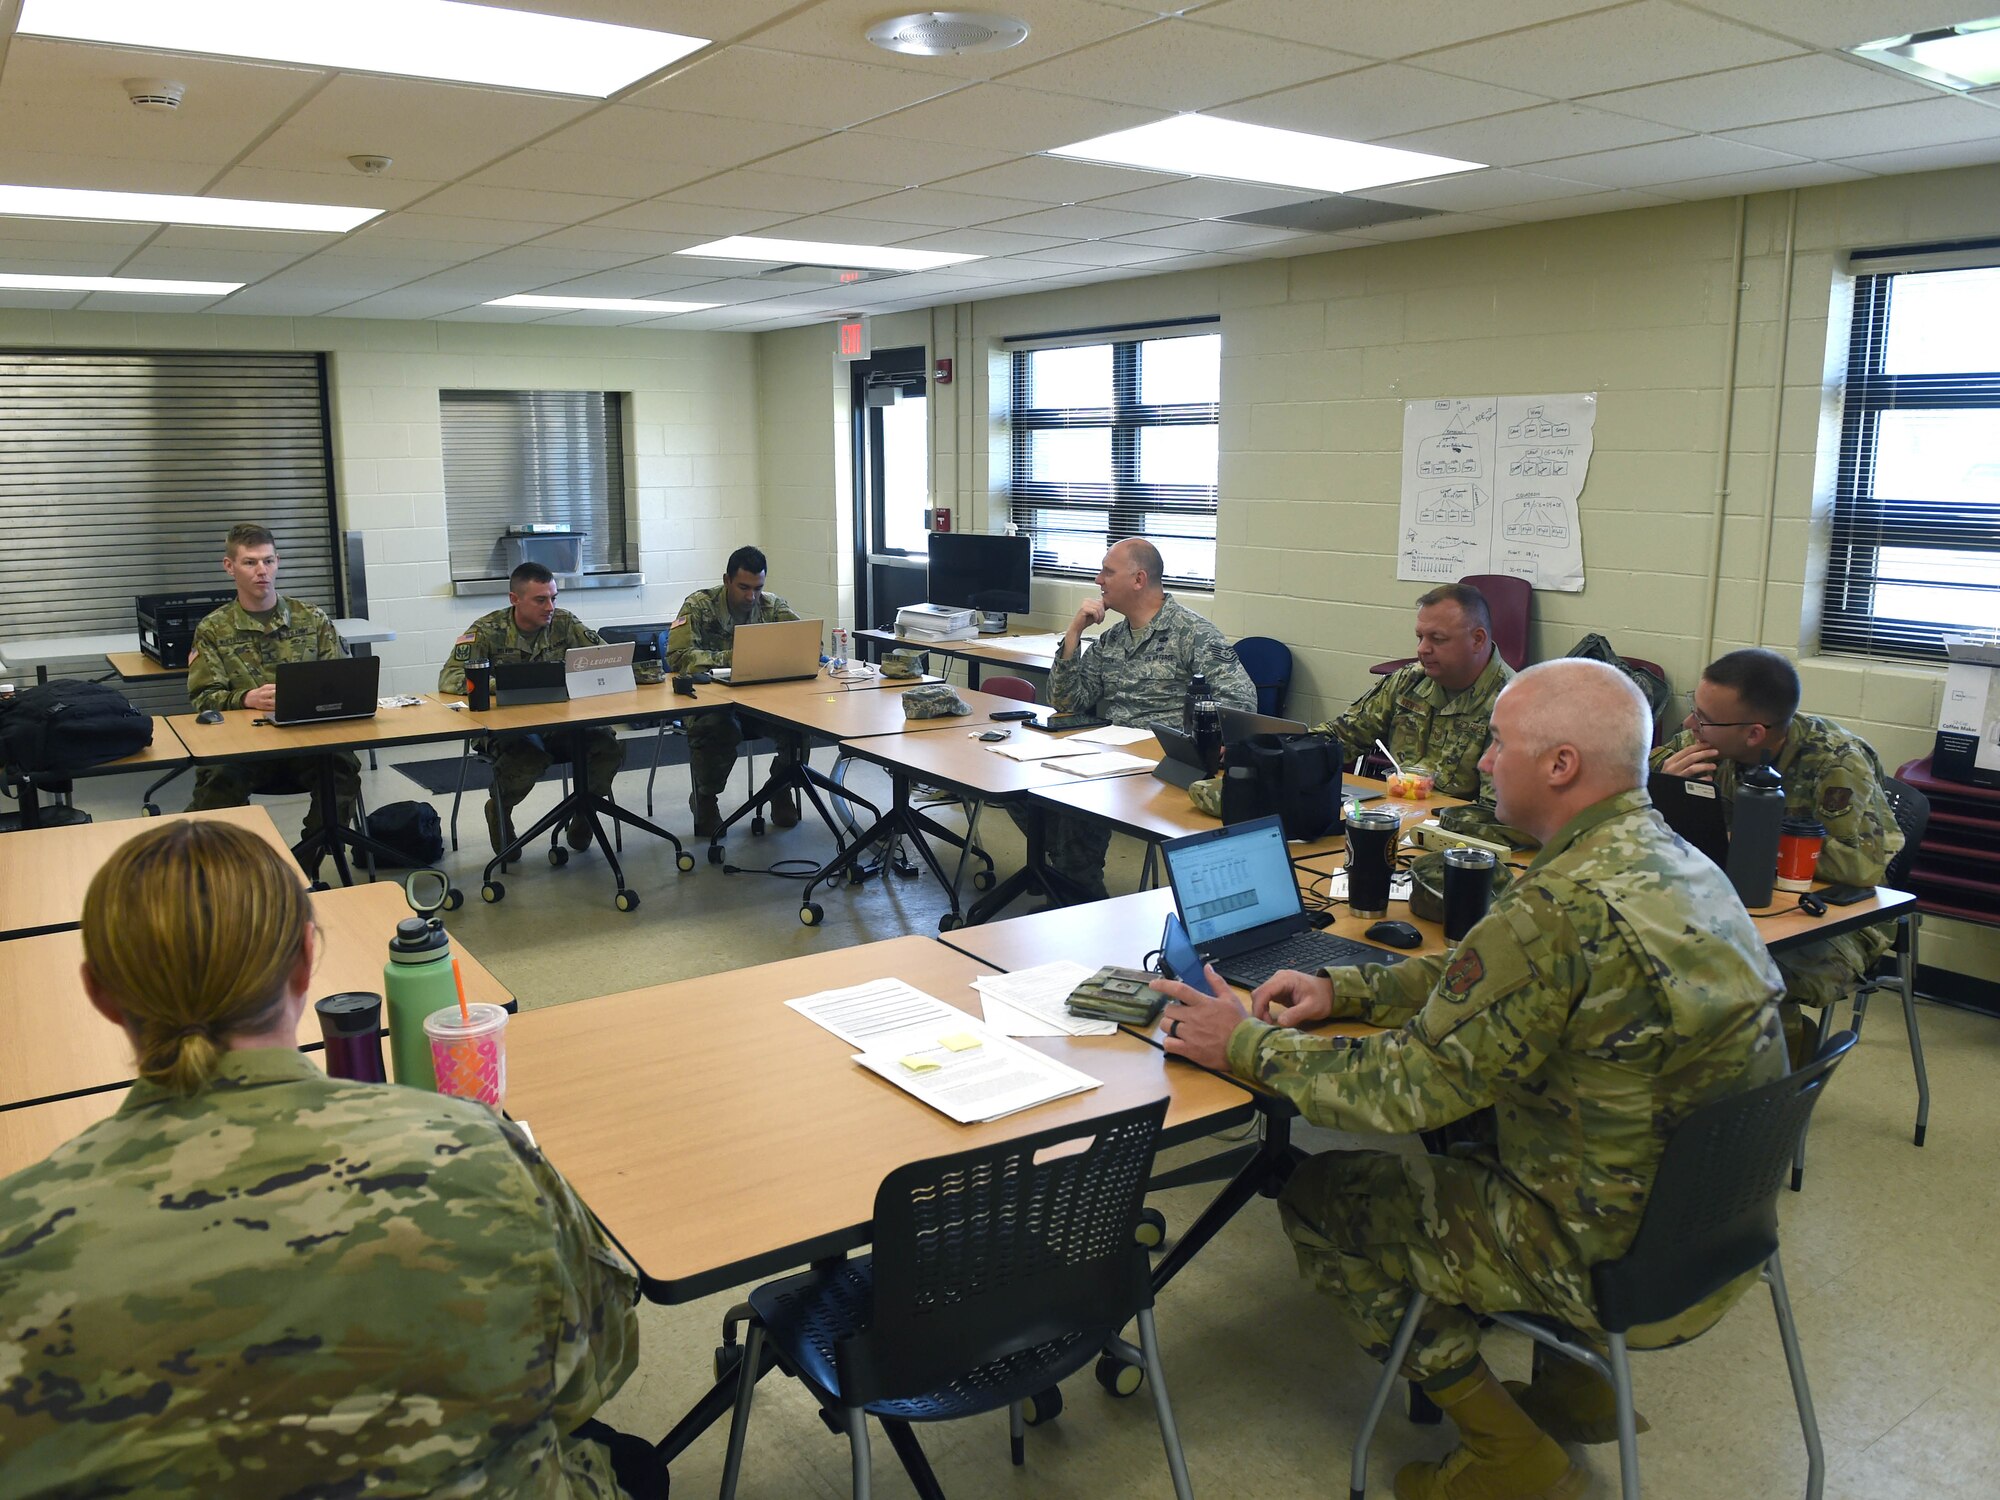 132d Wing Airmen along with Iowa Army National Guard Soldiers operate a COVID-19 contact tracing call center May 29, 2020, at Camp Dodge in Johnston, Iowa. The Airmen and Soldiers assist the Iowa Department of Public Heath in contact tracing. (U.S. Air National Guard photo by Staff Sgt. Michael J. Kelly)